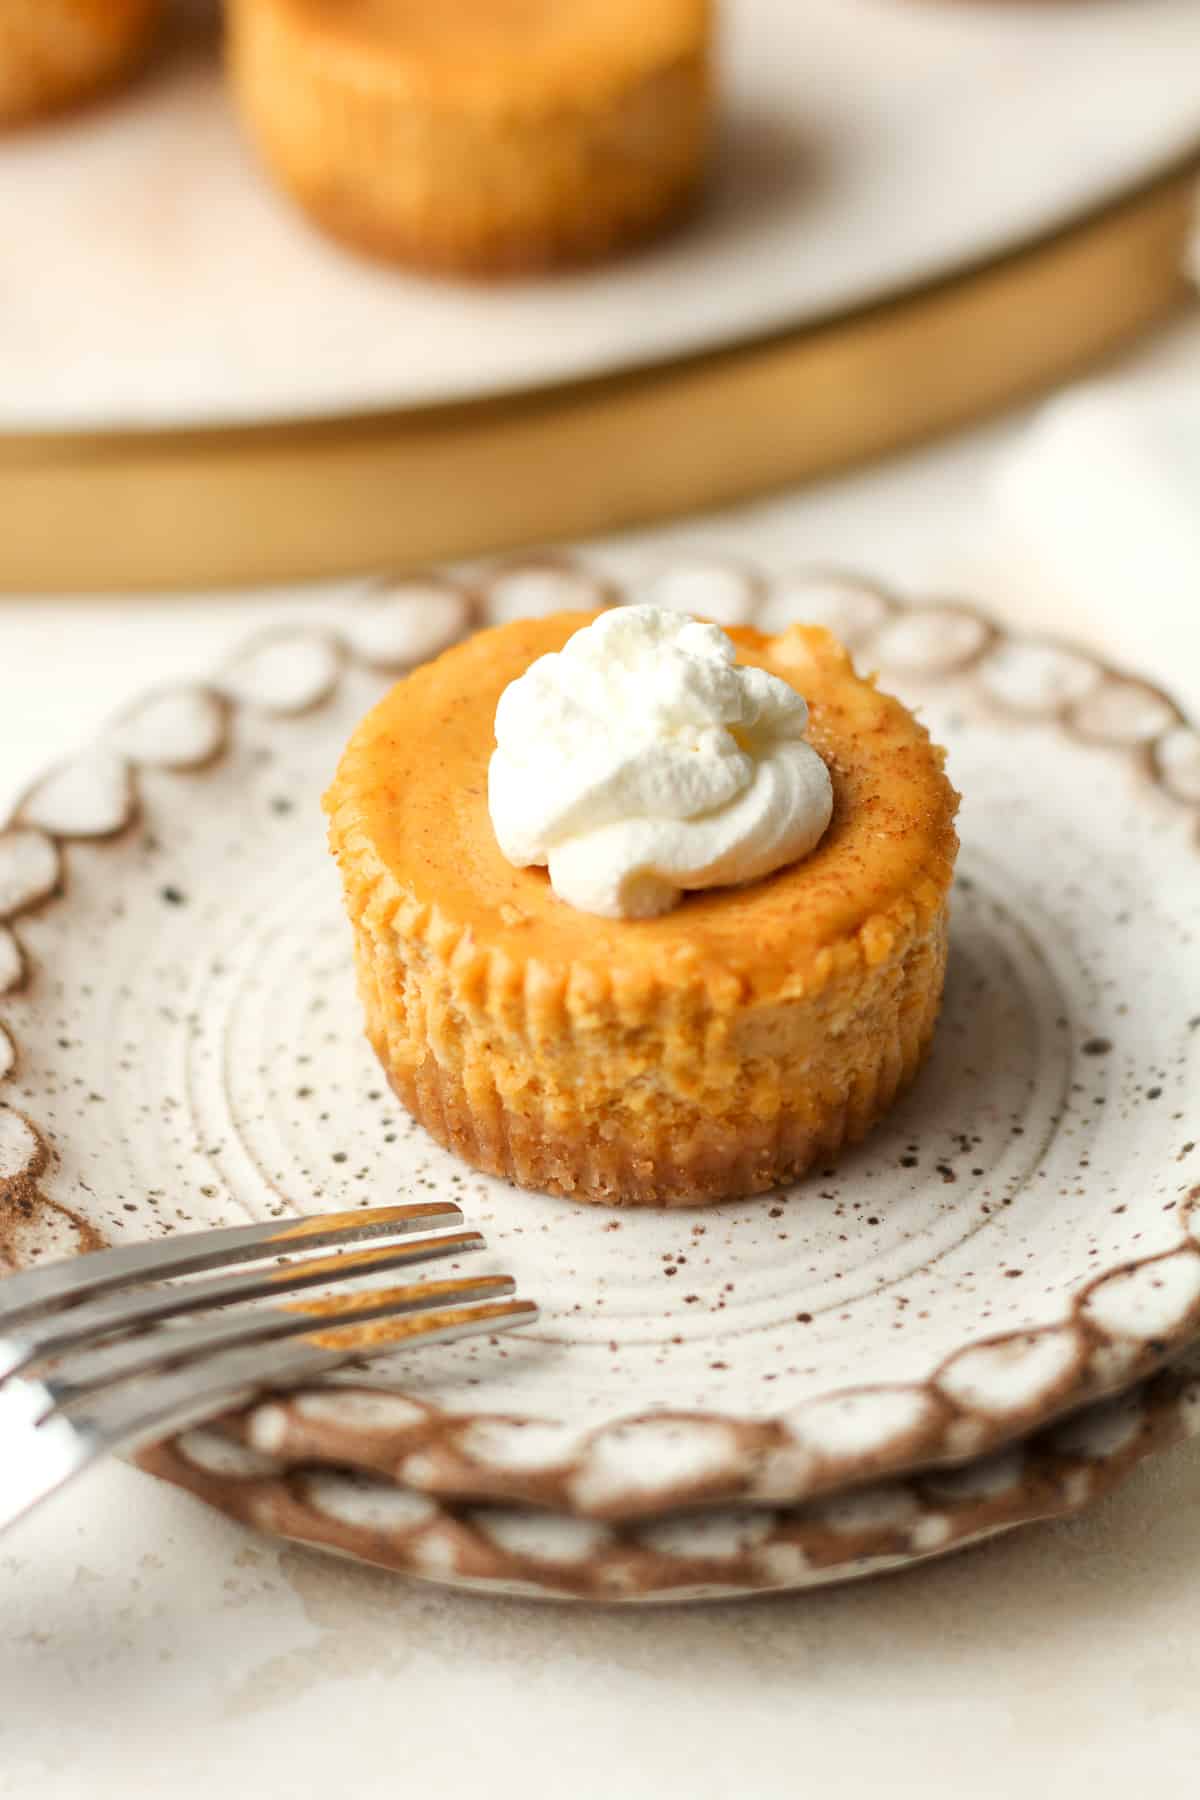 A mini pumpkin cheesecake on a plate with a fork.